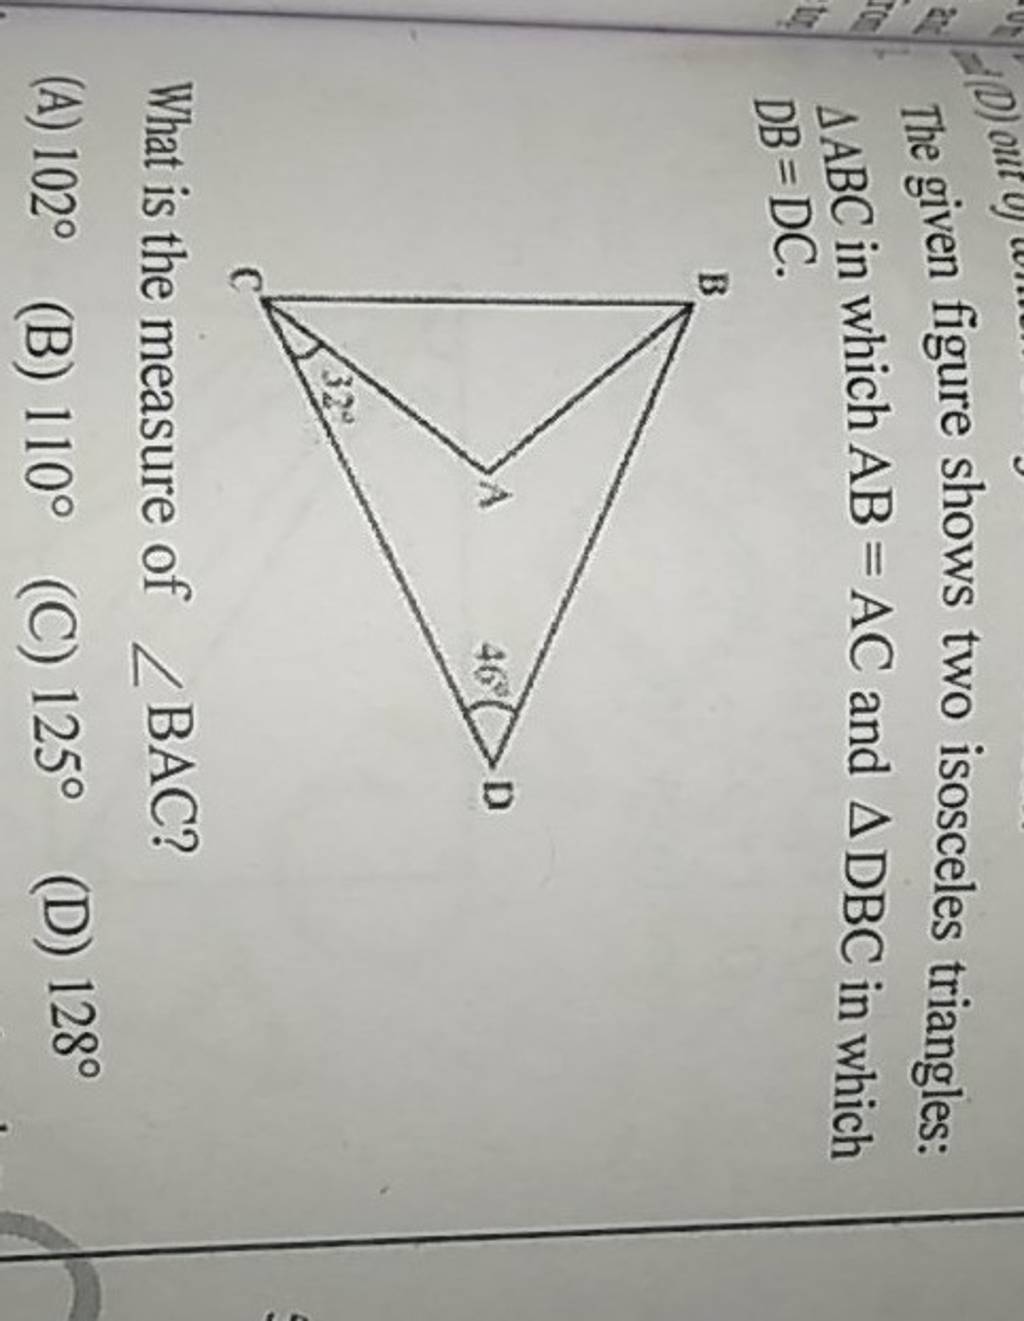 The given figure shows two isosceles triangles: △ABC in which AB=AC an